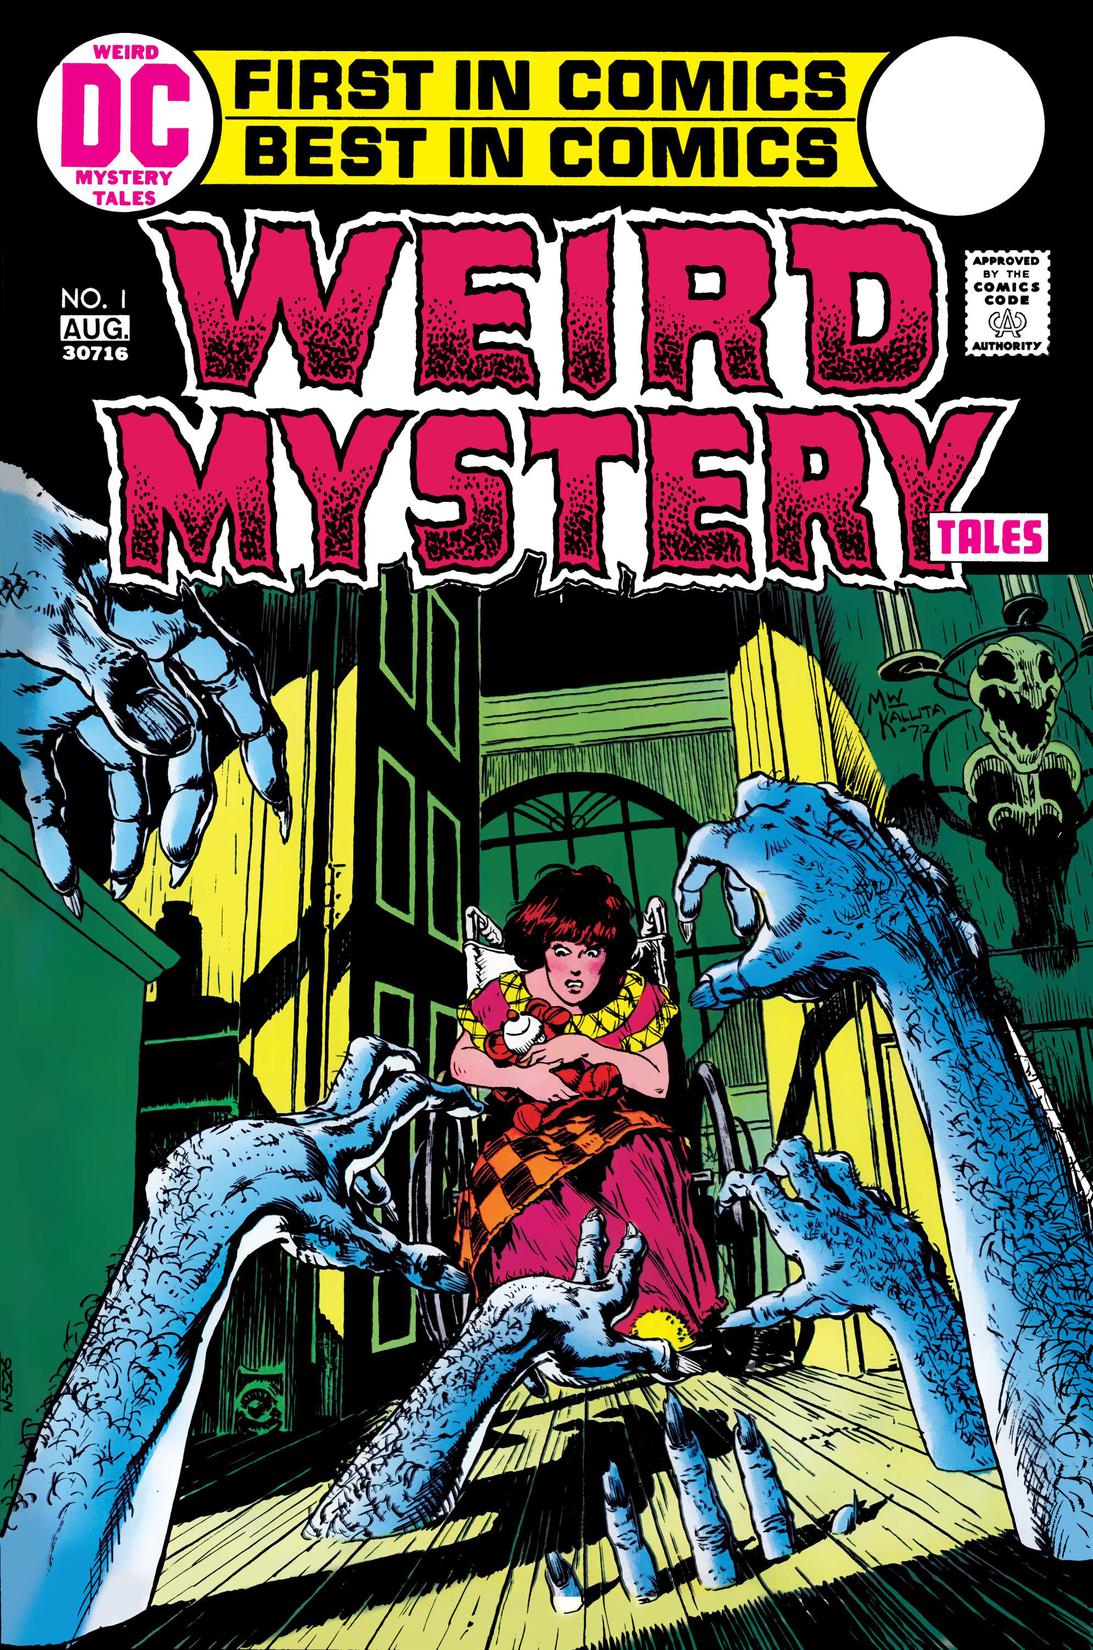 Weird Mystery Tales #1 preview images